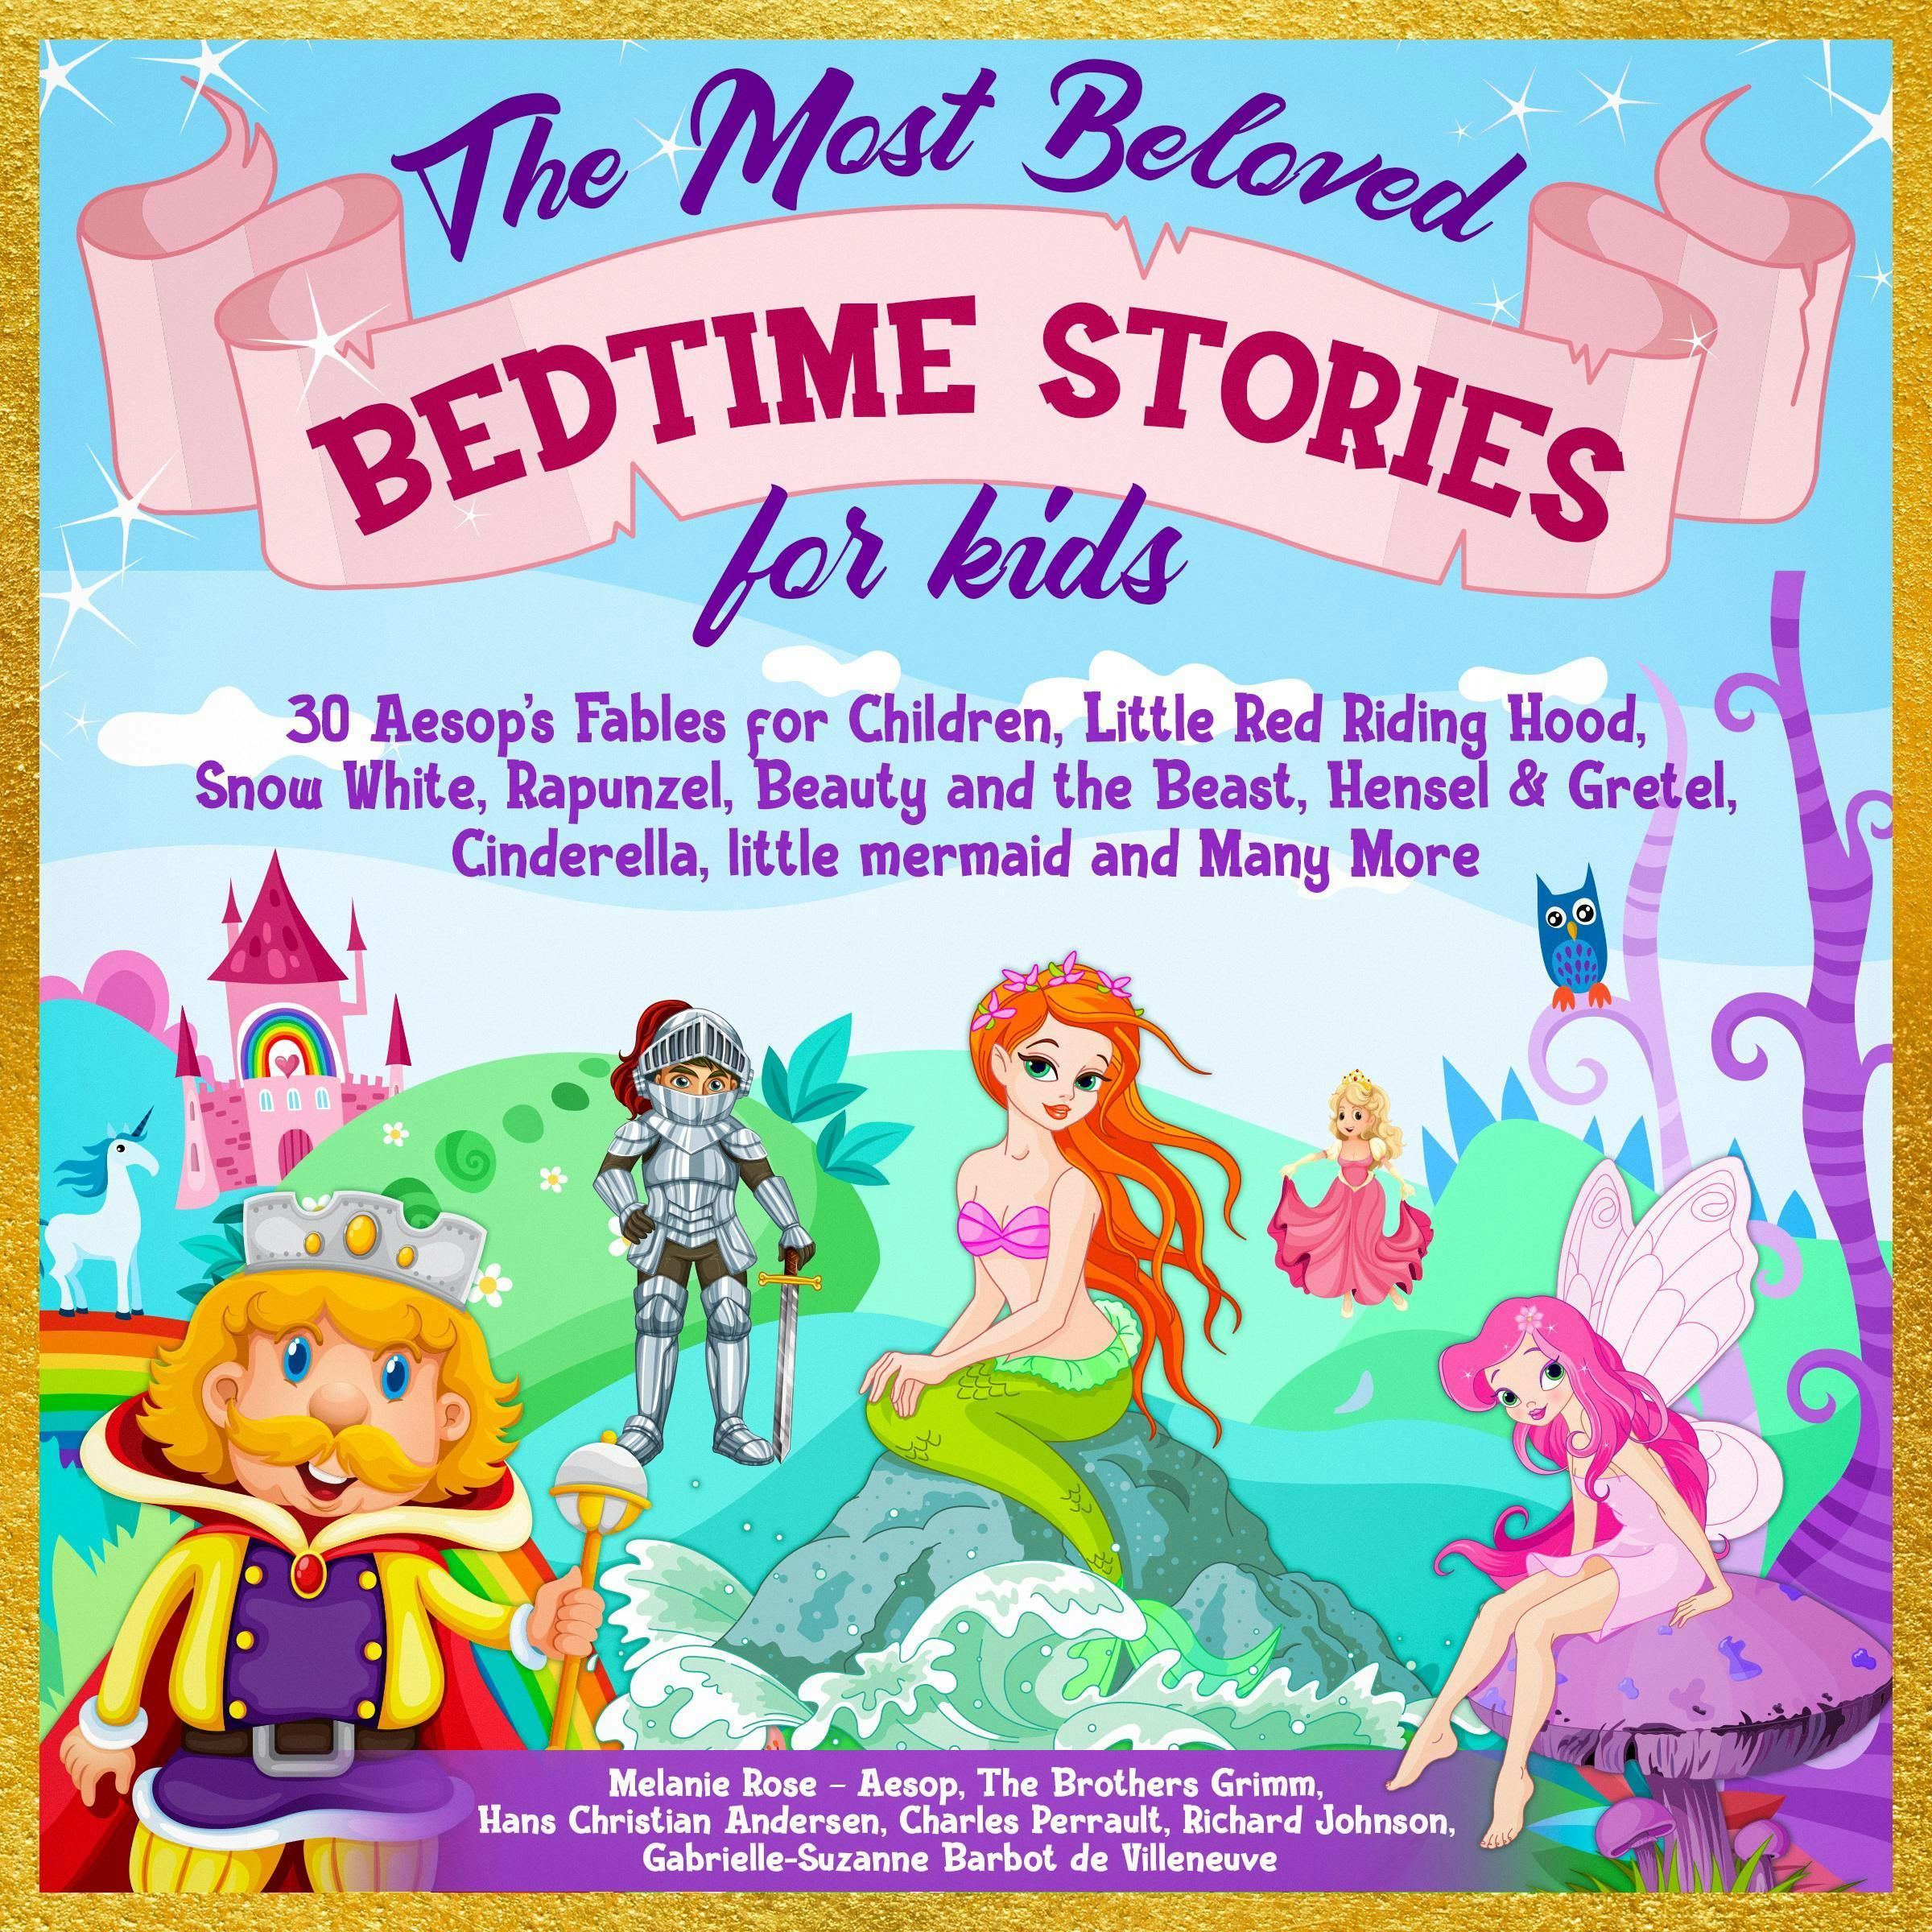 The Most Beloved Bedtime Stories for kids: 30 Aesop’s Fables for Children, Little Red Riding Hood, Snow White, Rapunzel, Beauty and the Beast, Hensel & Gretel, Cinderella, Little Mermaid and Many More - Hans Christian Andersen, Aesop, Melanie Rose, Charles Perrault, Richard Johnson, The Brothers Grimm